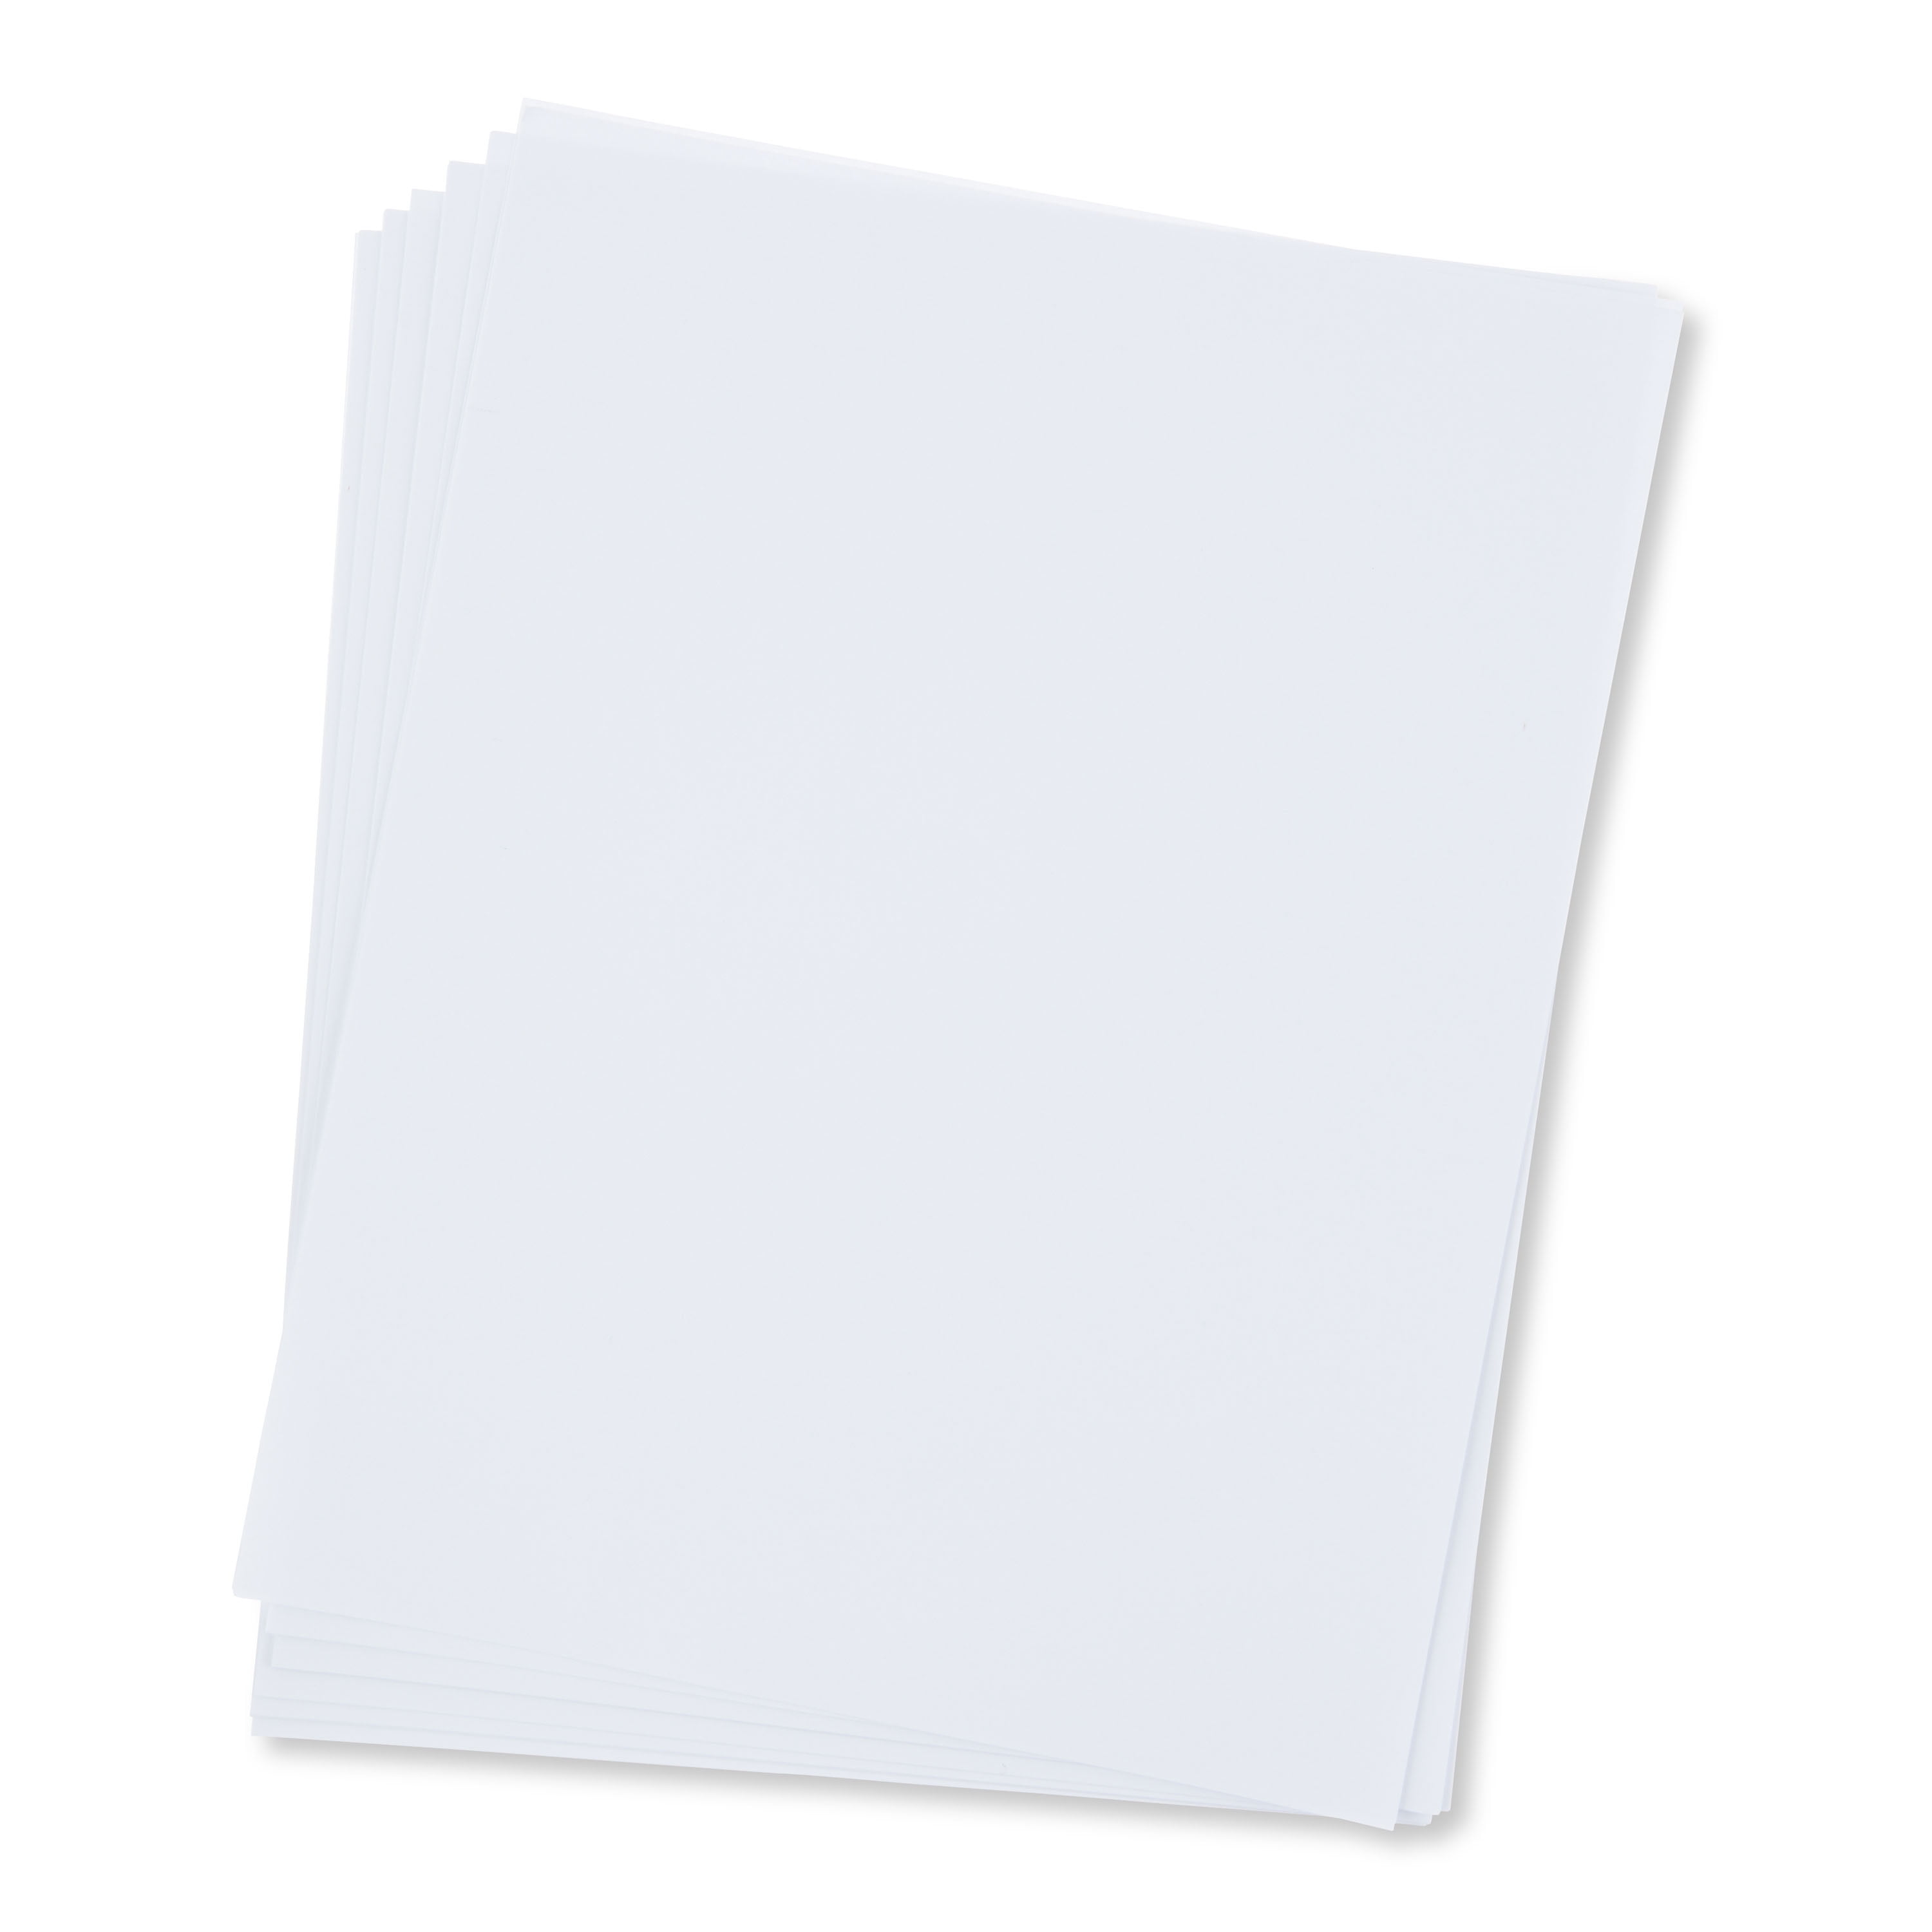 Pen + Gear Ivory Resume Paper, 24lb/89gsm, Laid Finish, 8.5 x 11 Inches, 100 Sheets